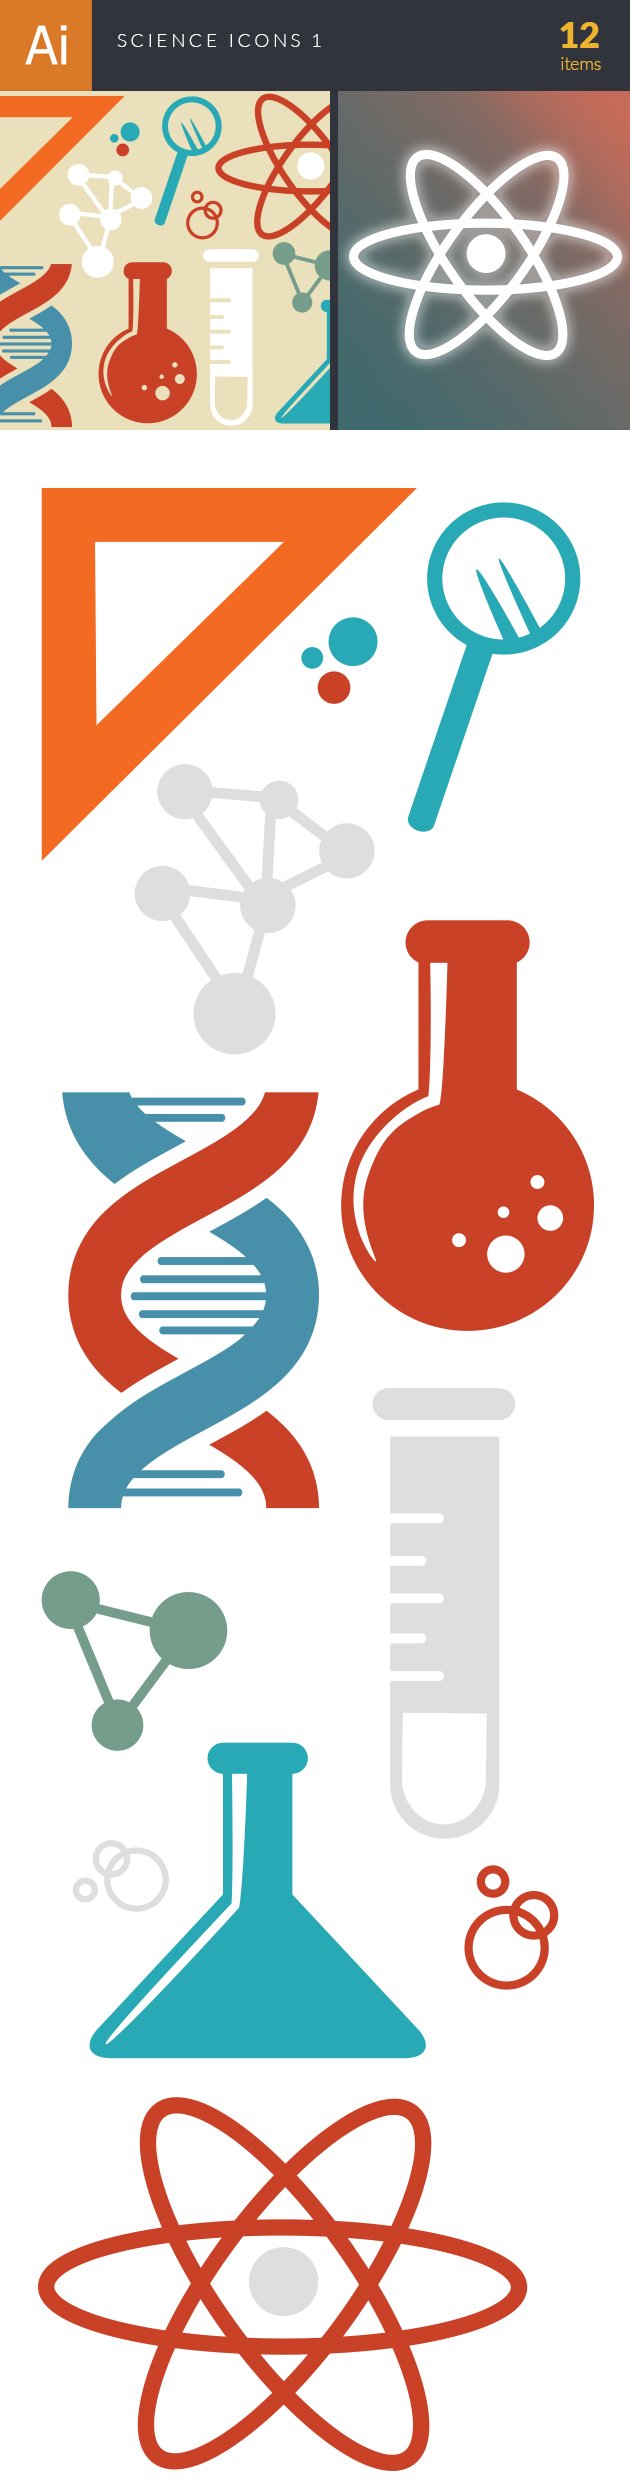 Science Icons Vector Set 1 2